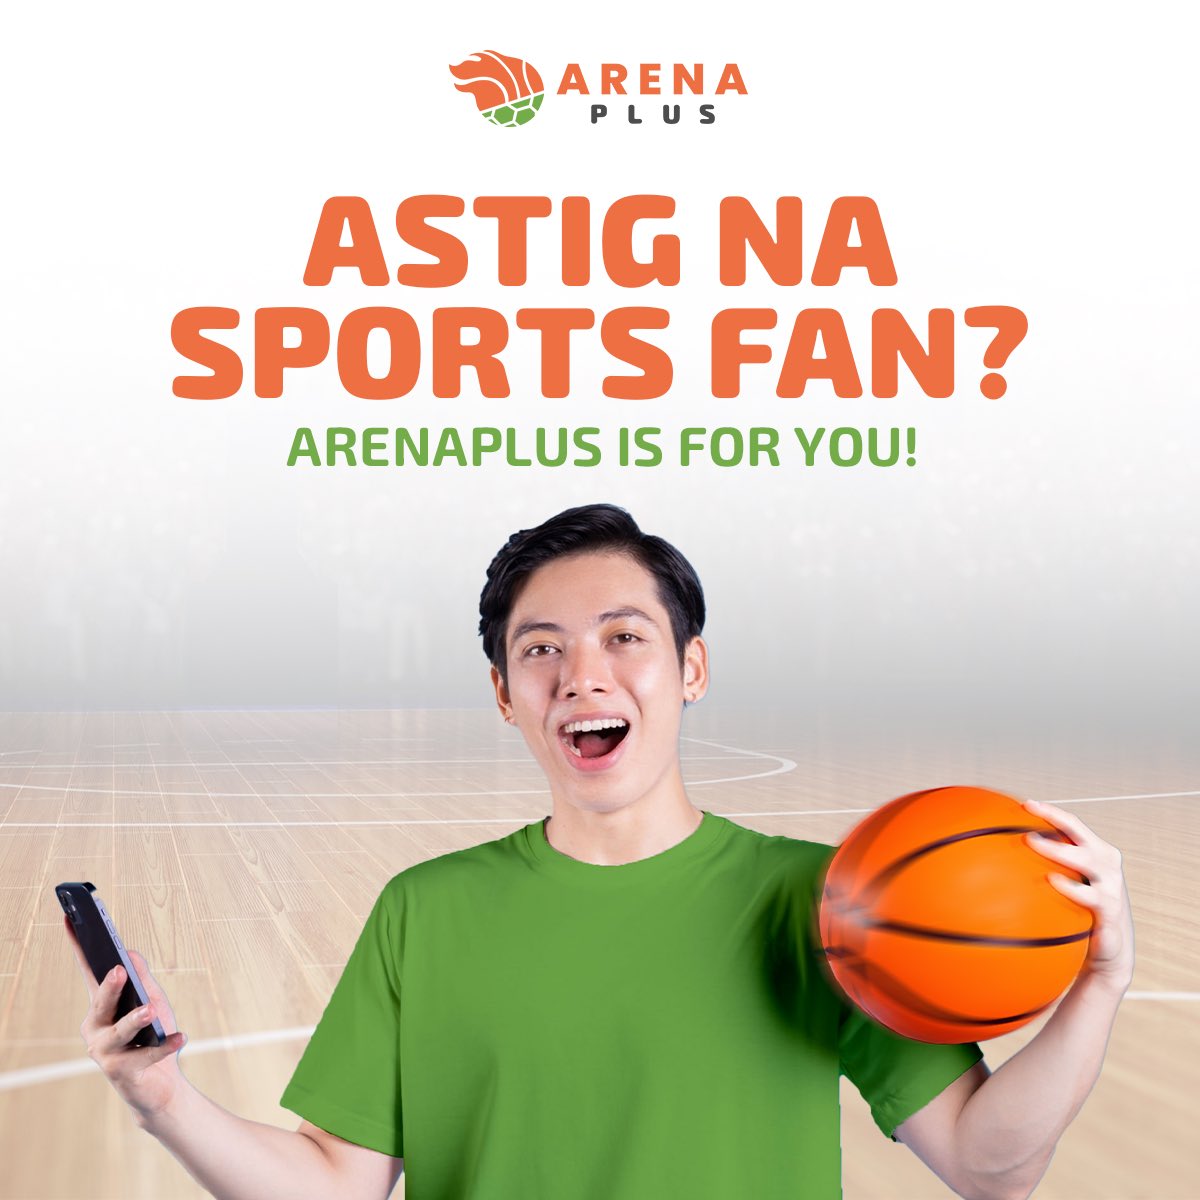 If you live and breathe sports, ArenaPlus is the app to show your support! 👍

Download na ng ArenaPlus at maging astig sa sports! 

#ArenaPlusPH #AstigSaSports #sportsbetting #sportsbook #onlinebetting #sports #nba #pba #basketball #football #ufc #mma #boxing